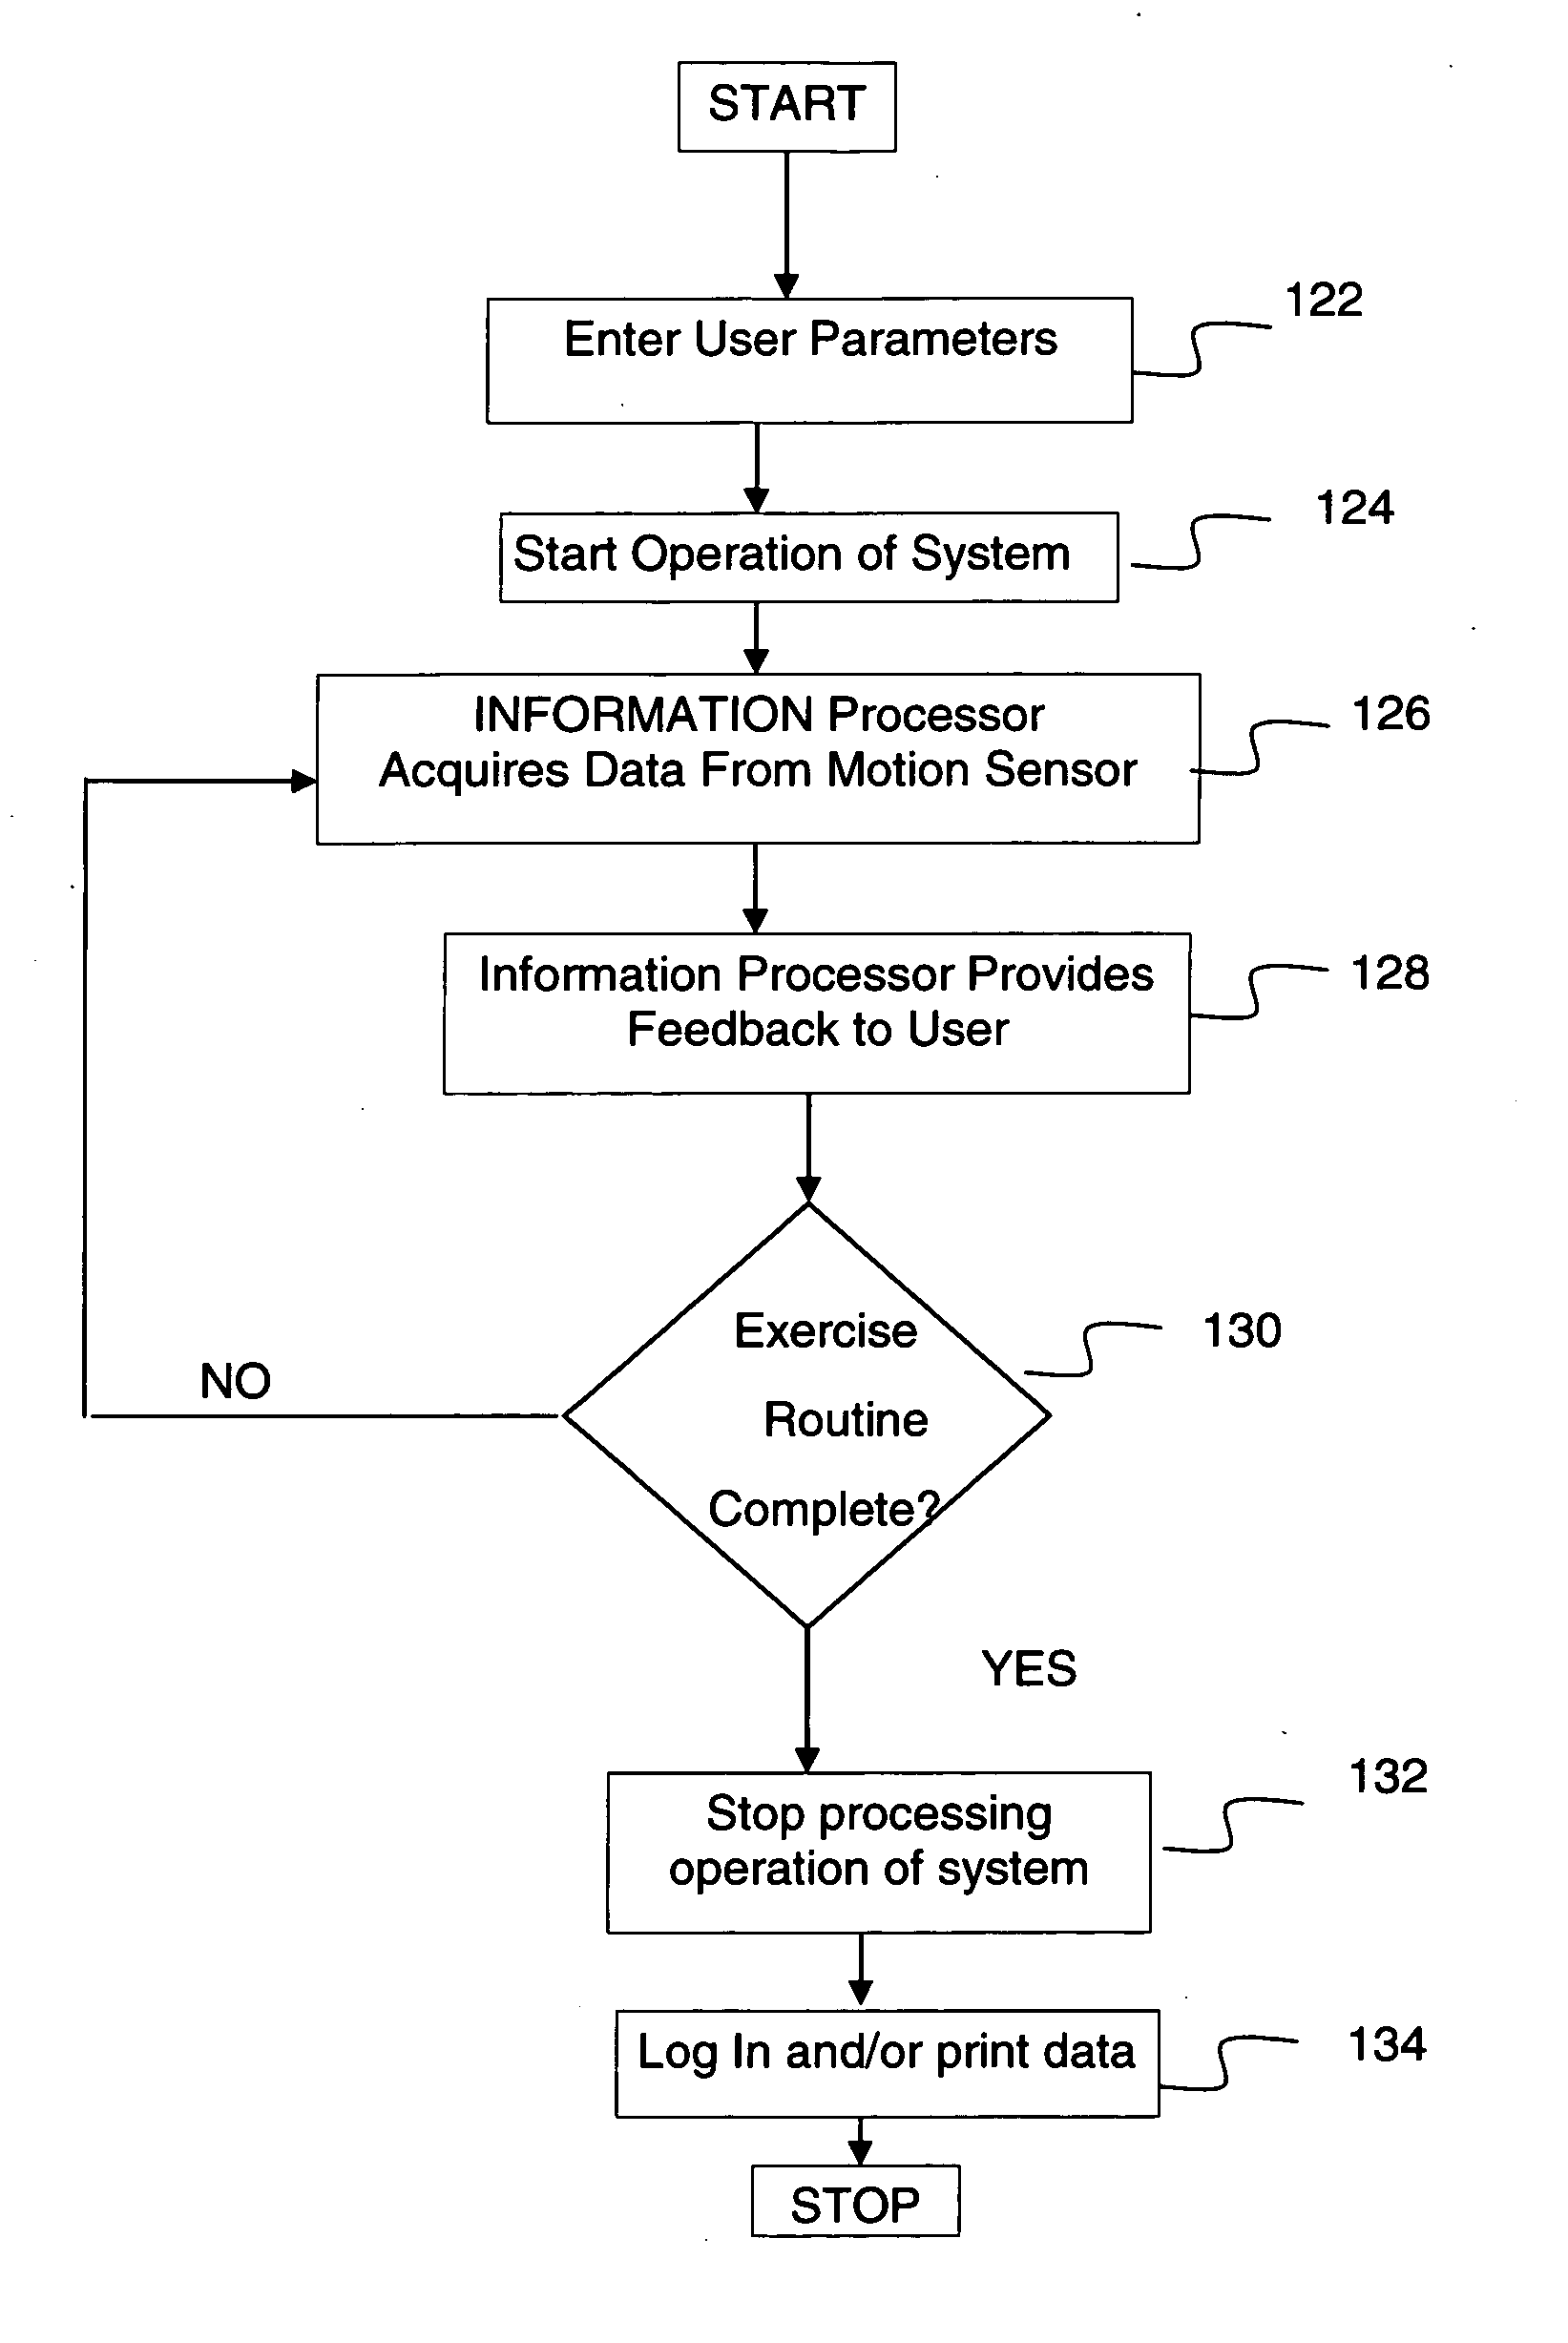 Wearable sensor system with gesture recognition for measuring physical performance